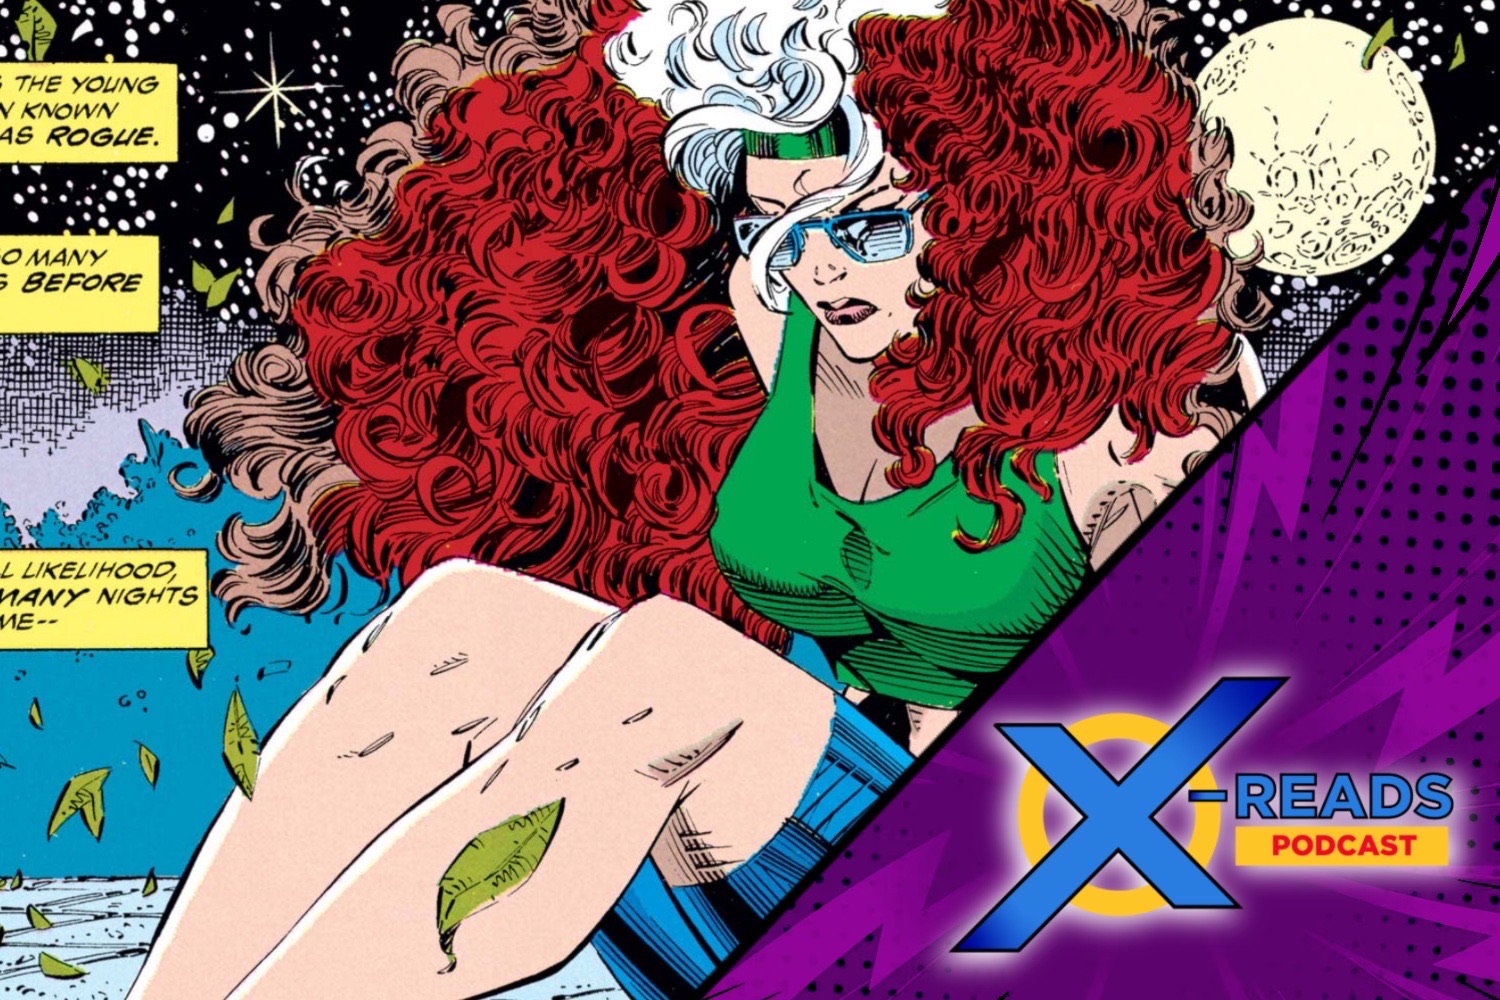 X-Reads Podcast Episode 96: 'Uncanny X-Men' #297 with Marvel's Ryan Penagos aka Agent M